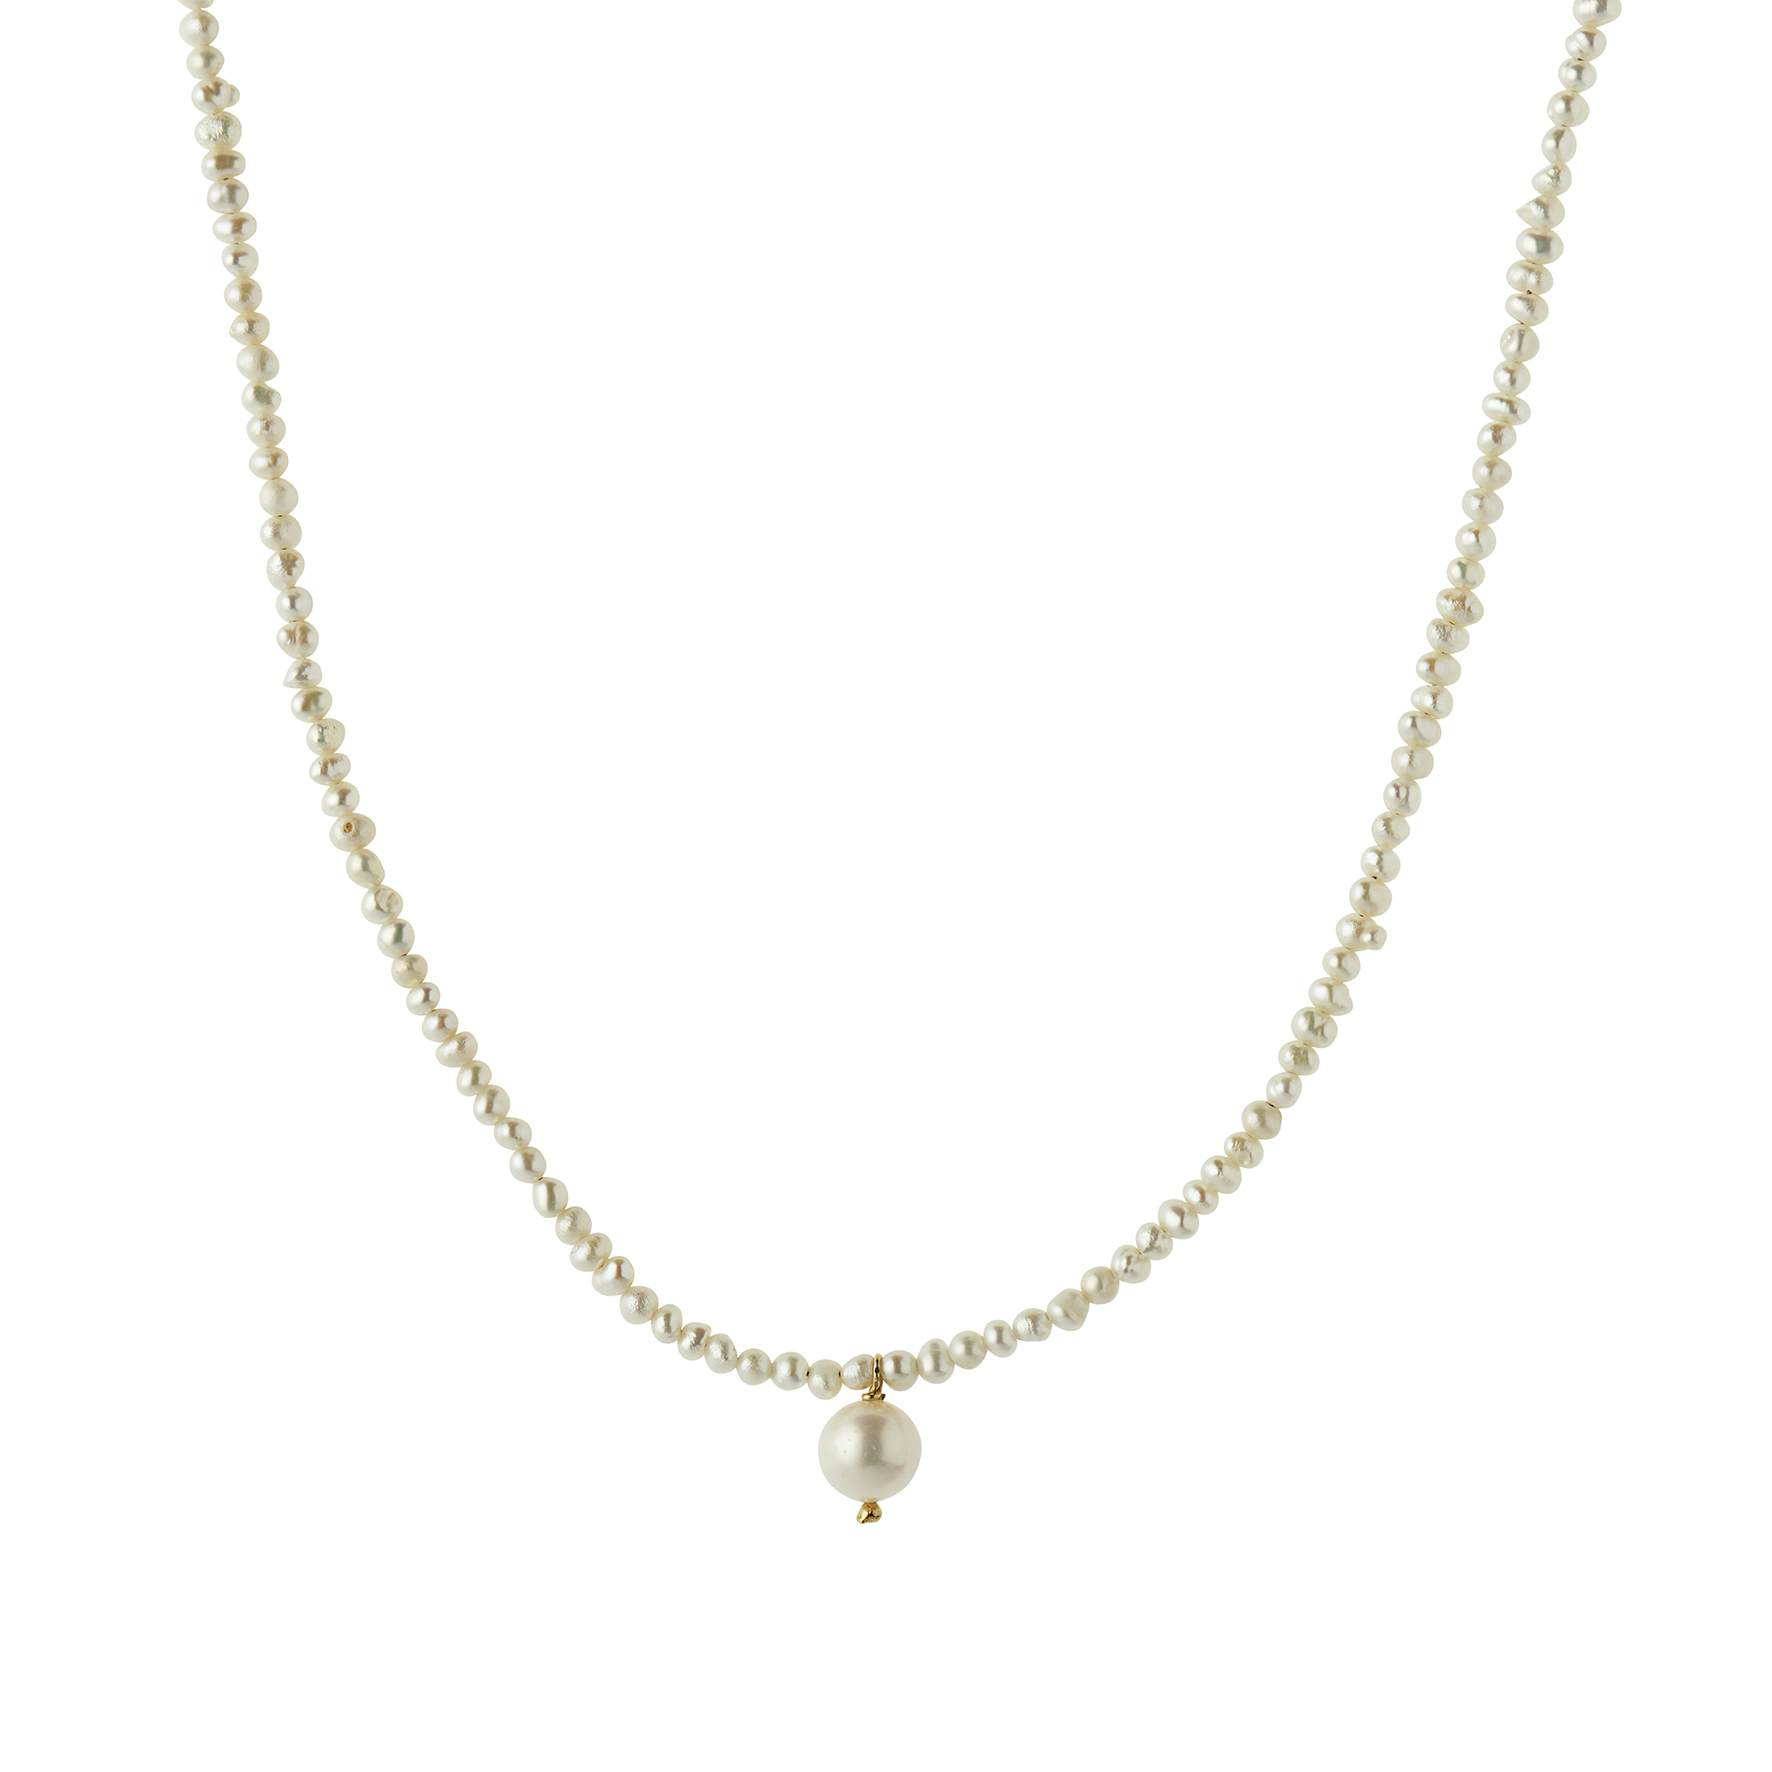 Heavenly Pearl Dream Necklace Classy